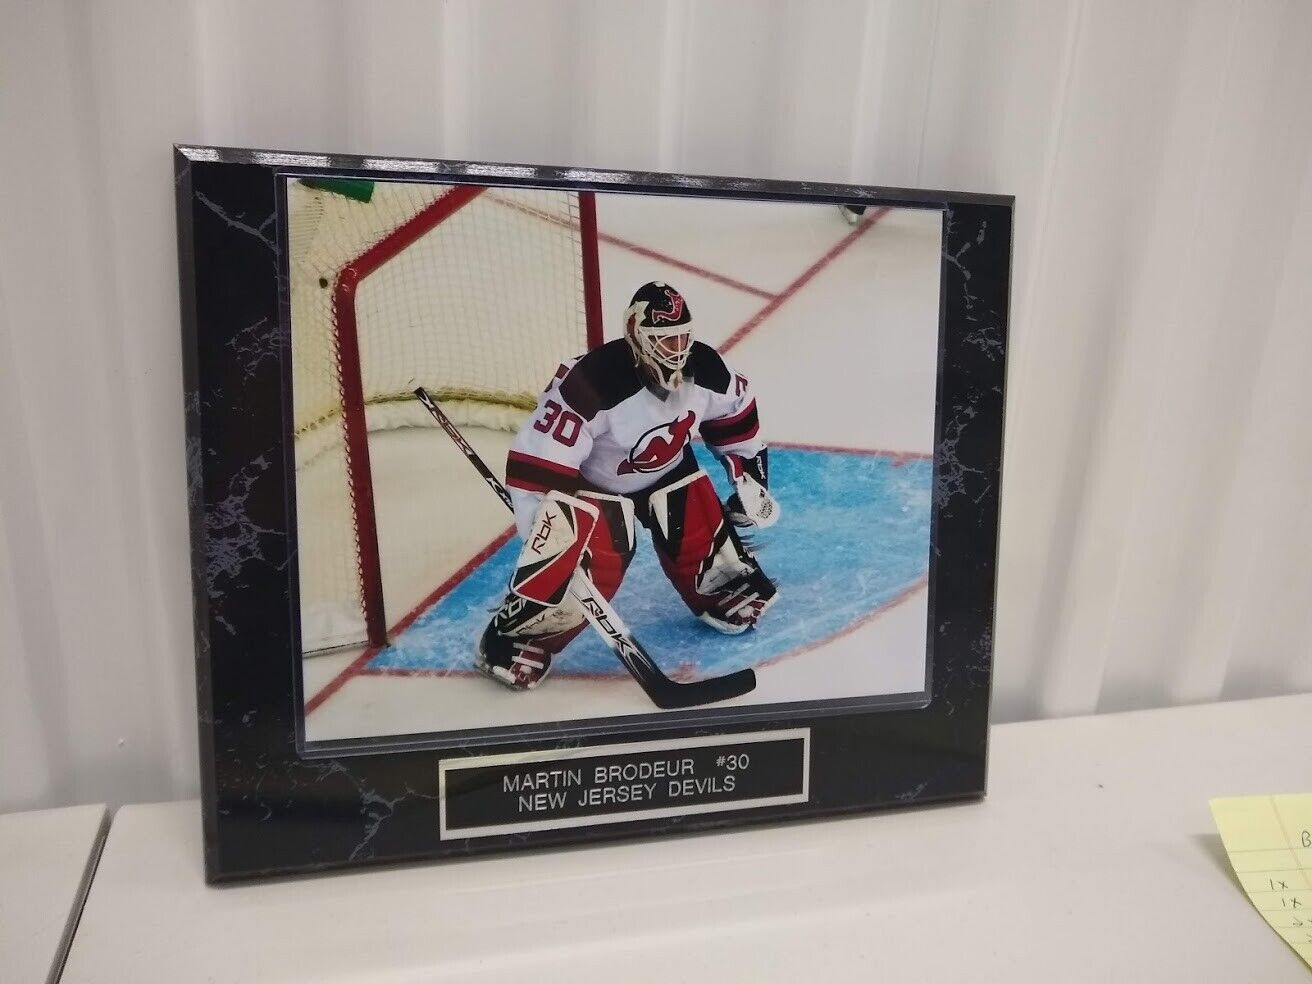 Martin Brodeur New Jersey Devils10 1/2 X 13 Black Marble Plaque With 8x10 Photo 